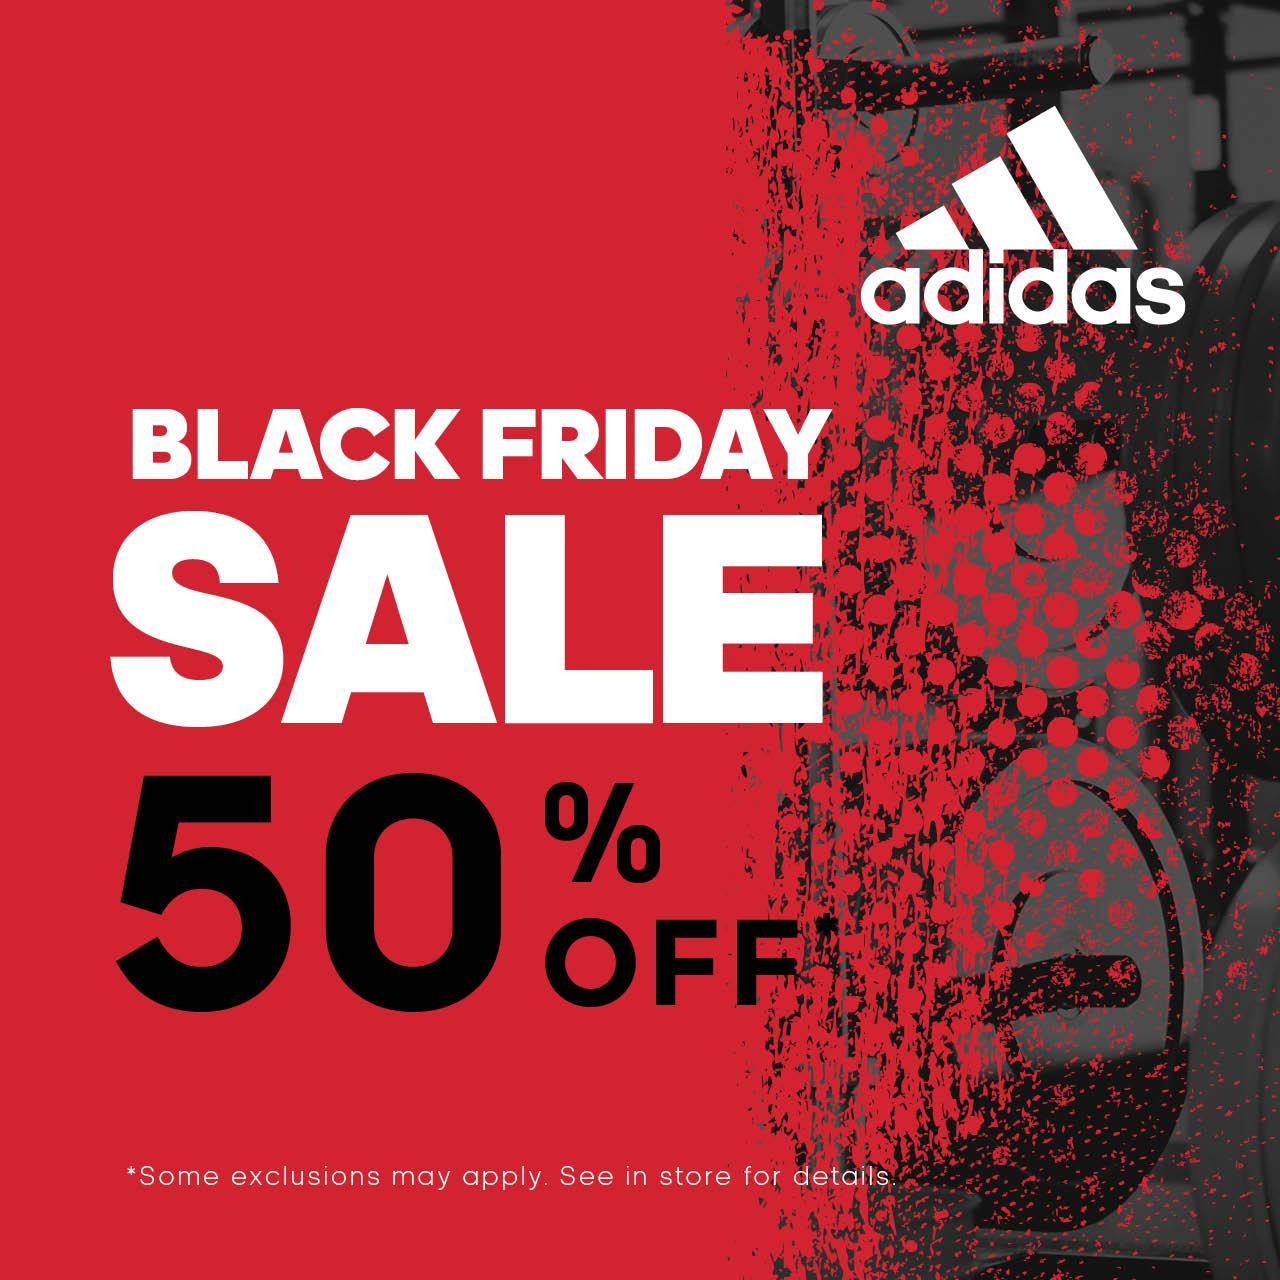 South Common on Twitter: the @adidas Outlet in South Common between November 23-27th and shop 50% off the entire store. blackfriday https://t.co/7ETFSTzeZn" / Twitter